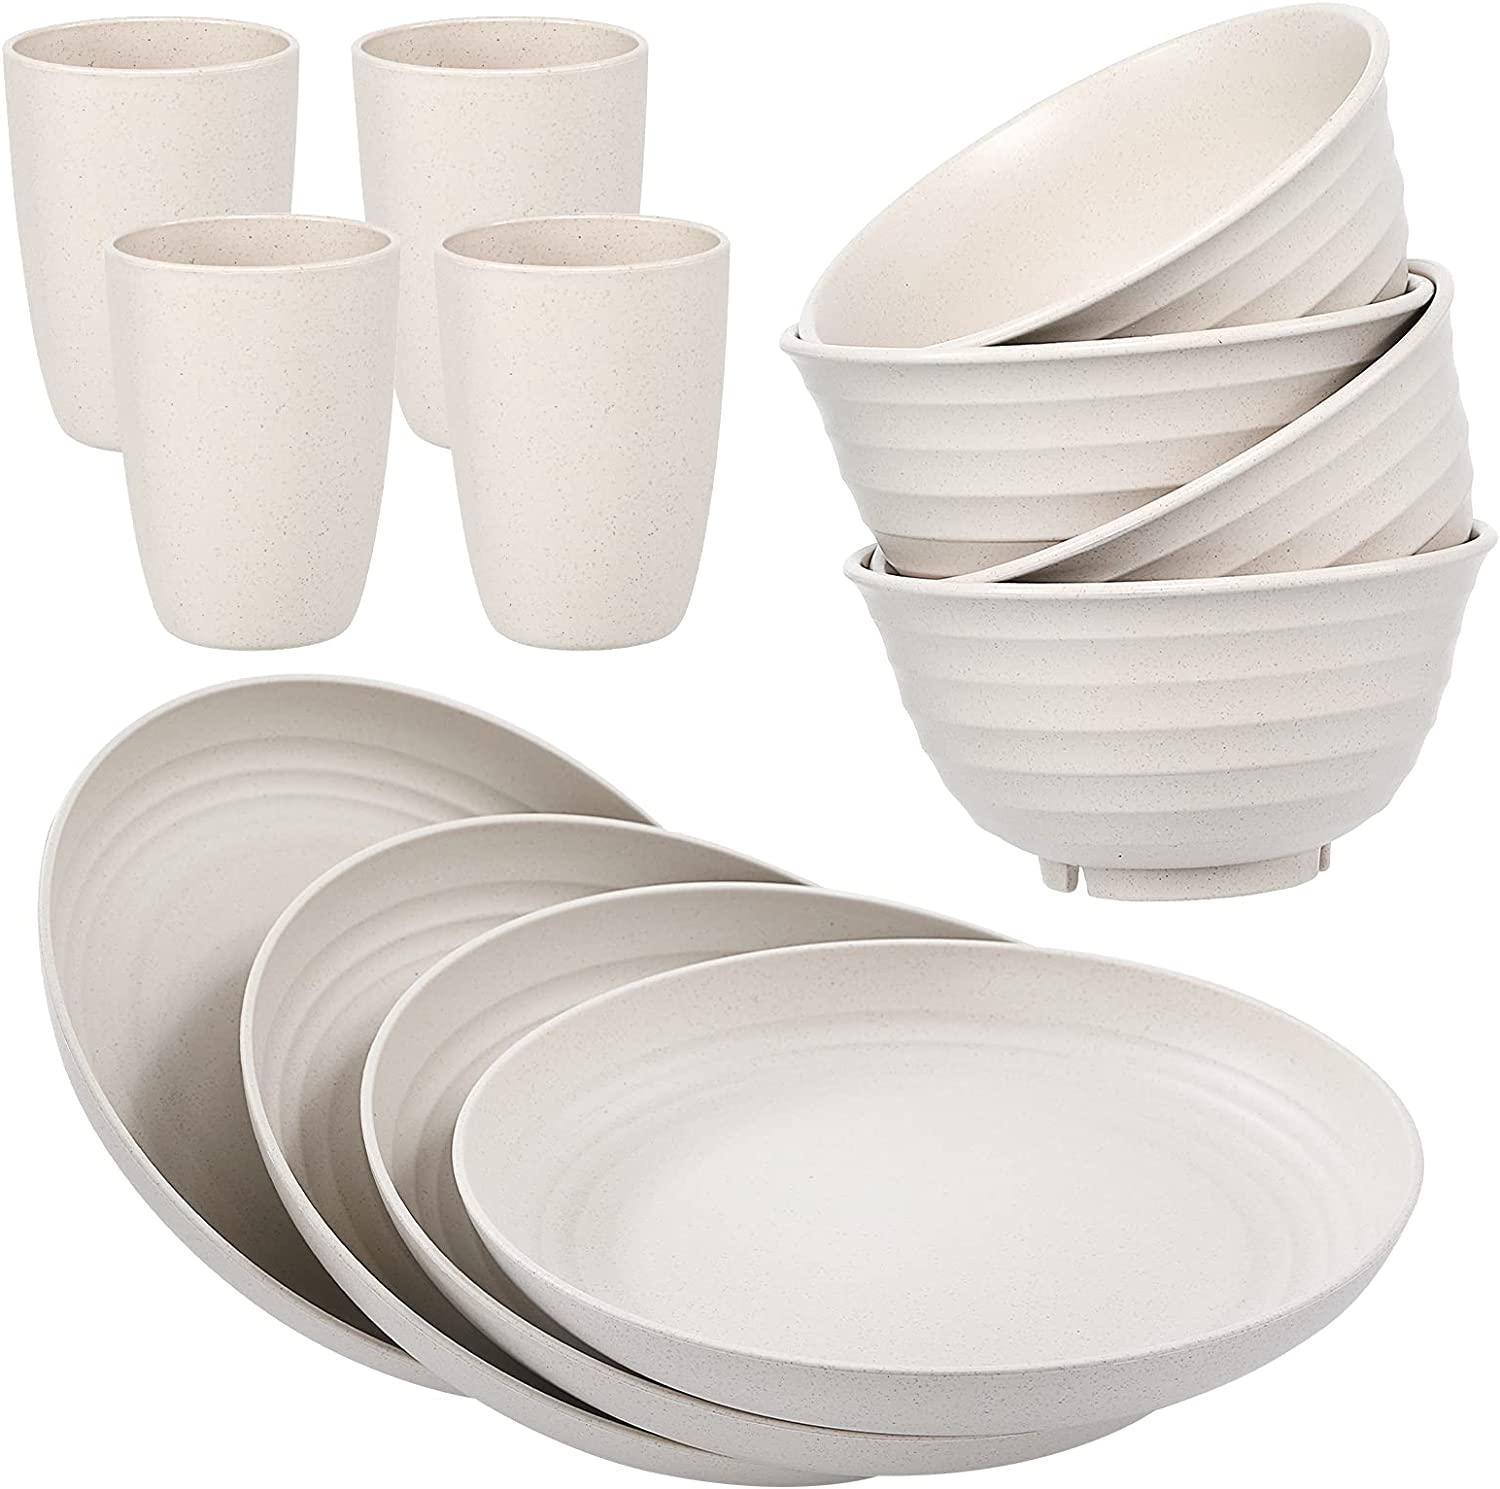 What Is Wheat Straw Dinnerware Made Of?